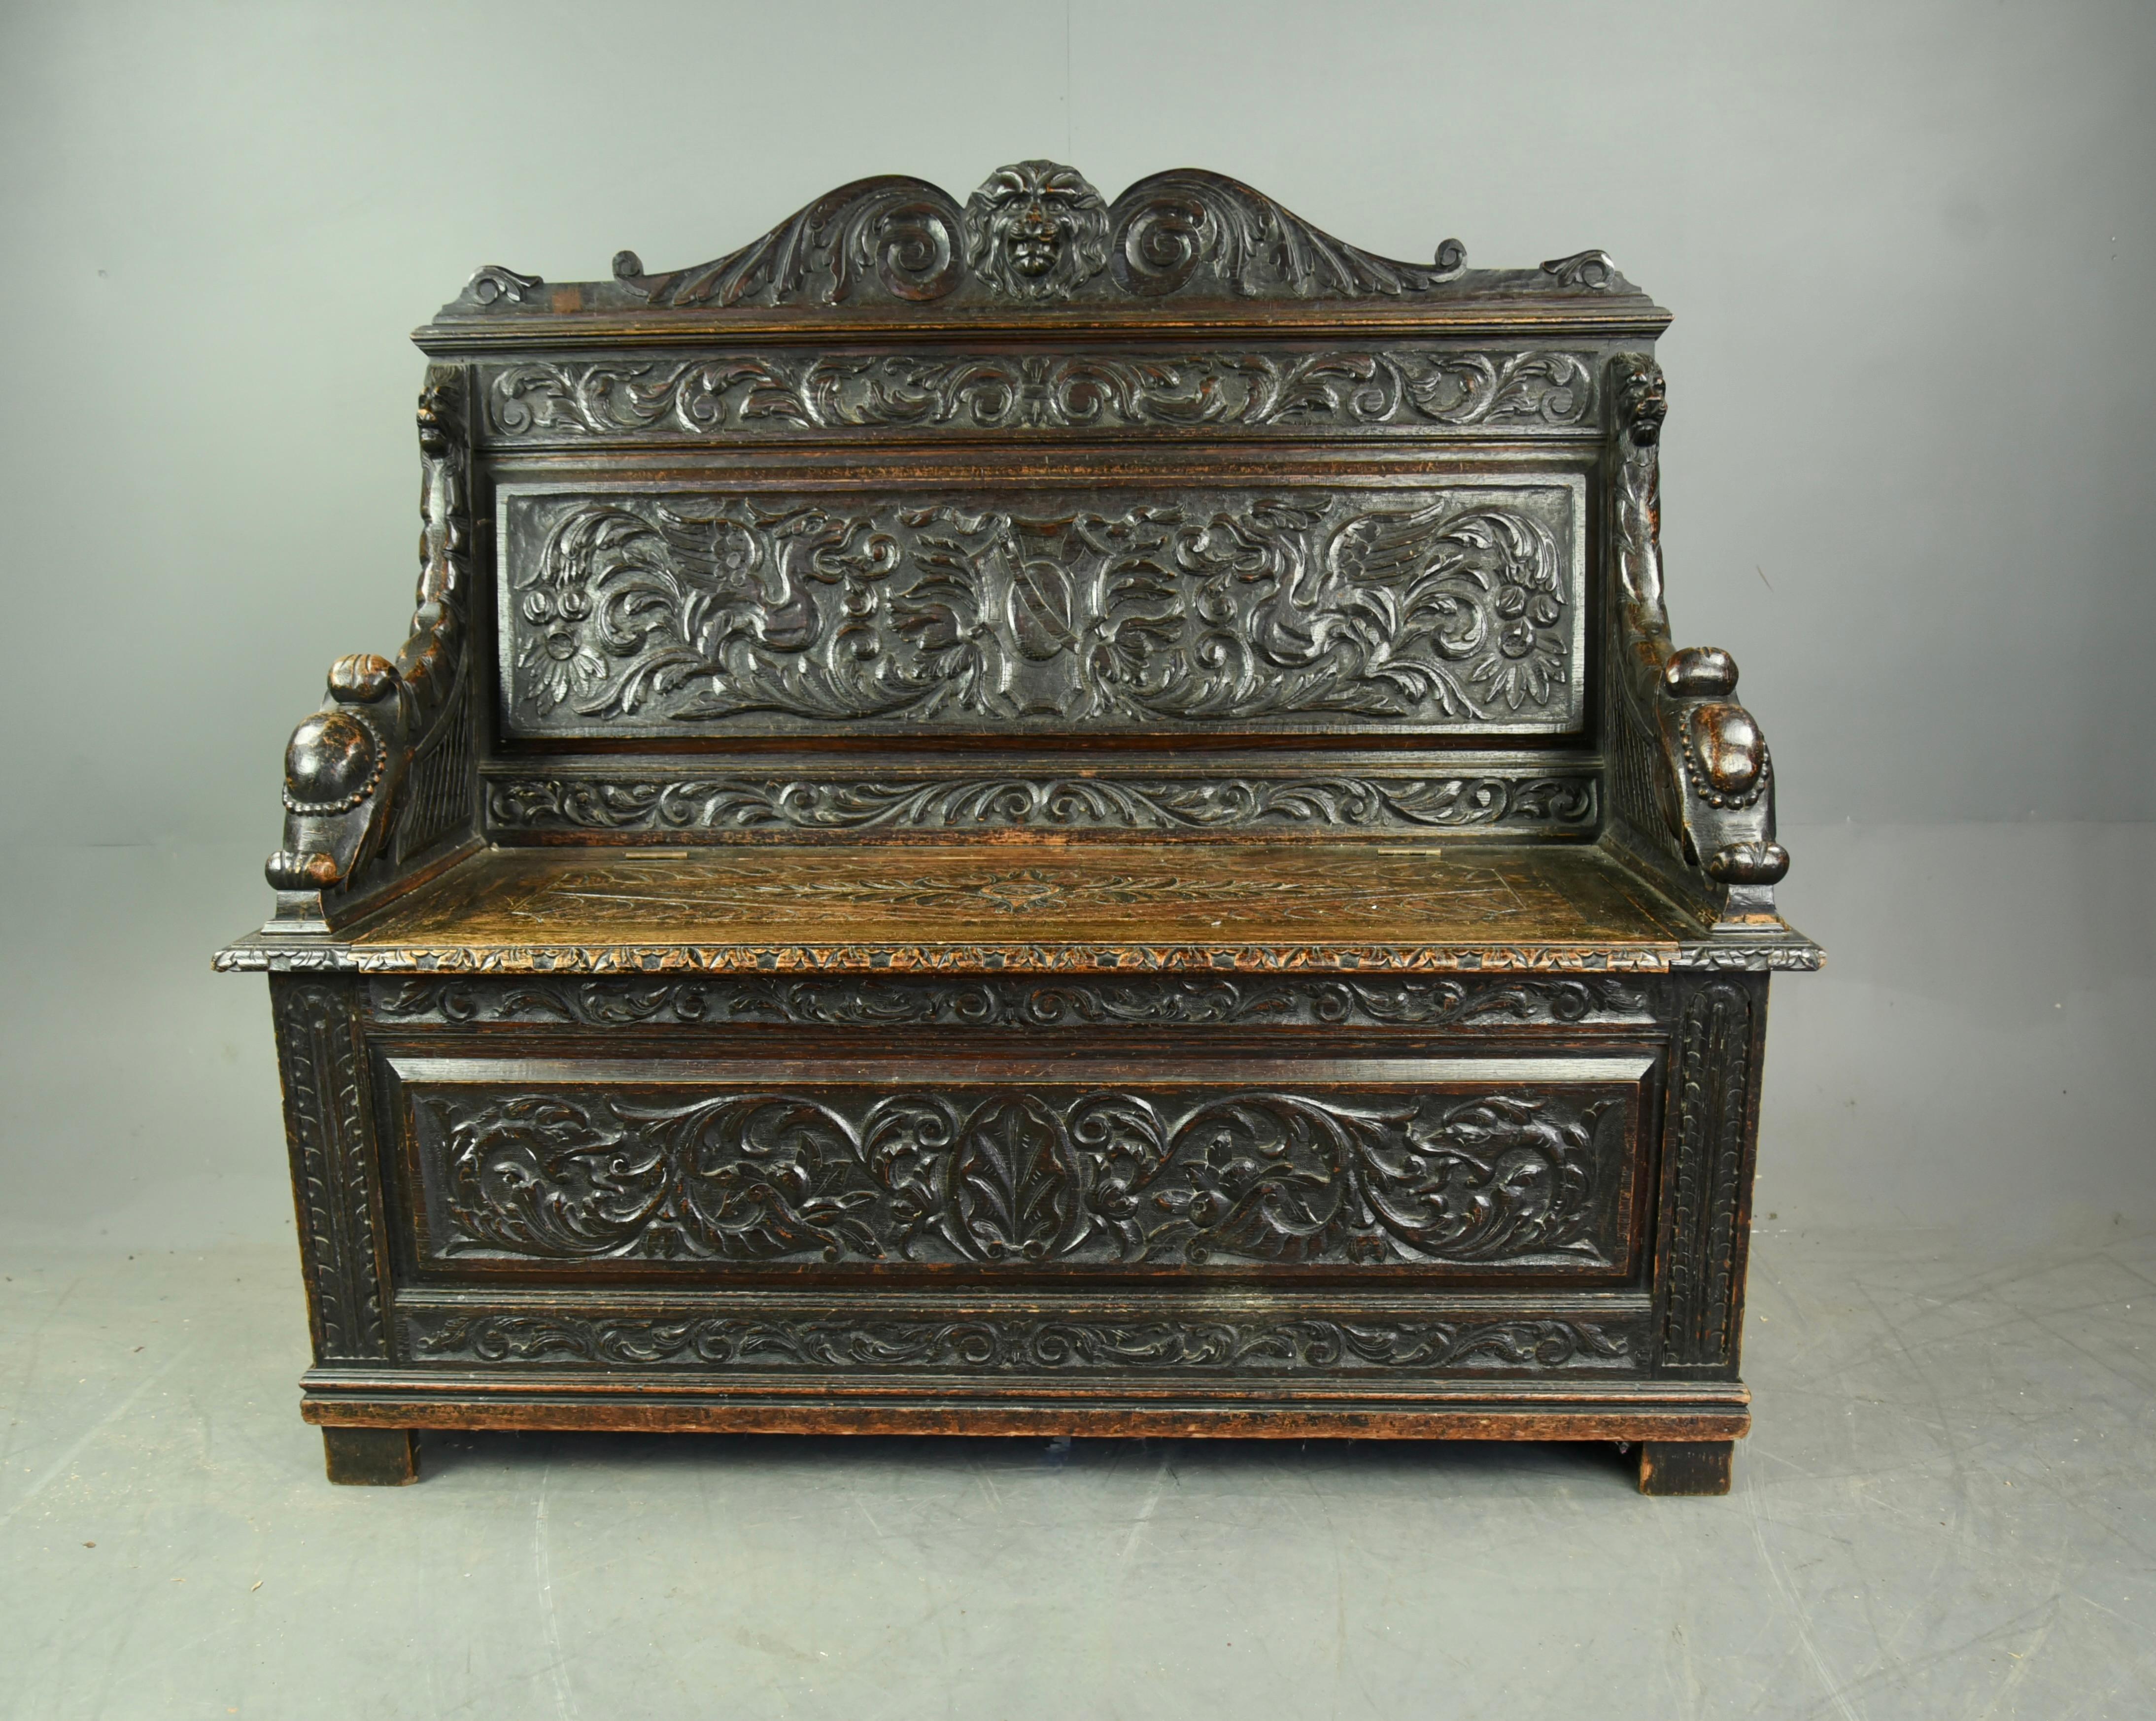 wonderful carved oak settle monks bench. The quality of the carving is excellent with the front, arms and back rest all profusely decorated. The seat is also beautifully carved and lifts to provide storage for boots, shoes, bags etc. This is a very